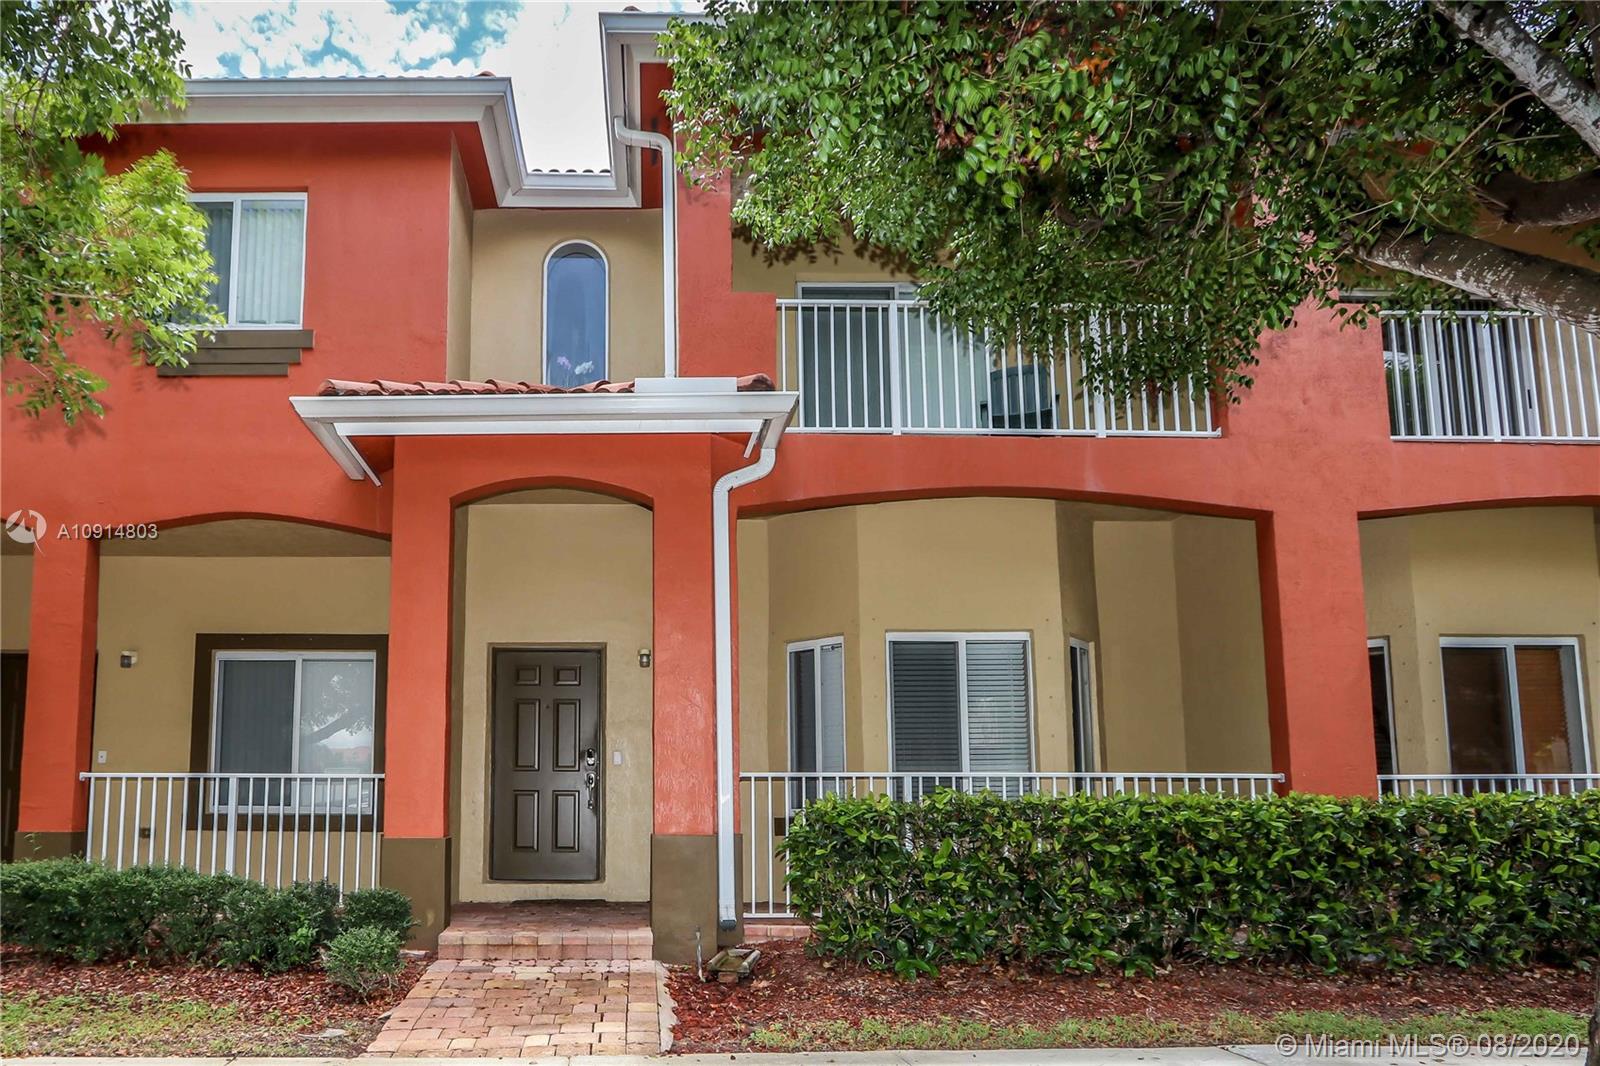 BEAUTIFULLY UPDATED 2 BR/ 2.5 BA TOWN HOME W/ GARAGE  IN DESIRABLE ARBOR PARK AT KEYS GATE.  THIS SPACIOUS HOME HAS BEEN VERY WELL MAINTAINED AND OFFERS MANY GREAT FEATURES; TILE FLOORS IN LIVING AREAS, UPGRADED KITCHEN W/ 42" CABINETS & TILE BACKSPLASH, NEWER STAINLESS STEELE APPLIANCES  & PAVED COURTYARD.  ALSO OFFERS LARGE MASTER SUITE W/ ROMAN TUB & SEPARATE SHOWER, BALCONY OFF 2ND BEDROOM, PLENTY OF CLOSETS FOR STORAGE,  NEWER CARPET UPSTAIRS, NEWER AC SYSTEM W/ NEST CONTROL & IMPACT WINDOWS ON 2ND FLOOR. A MUST SEE!